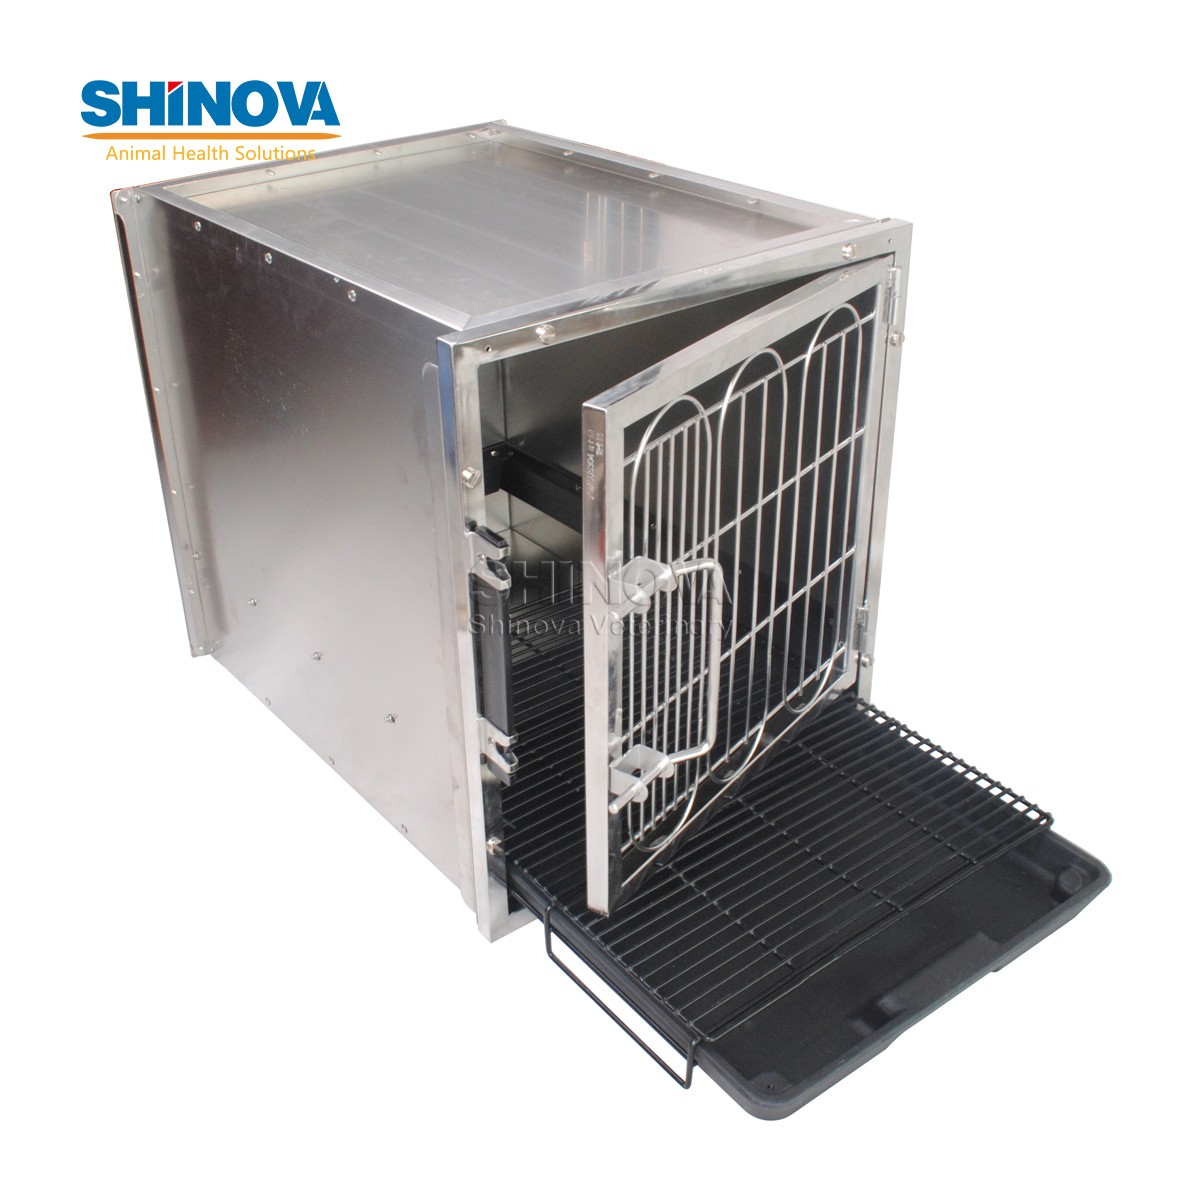 Stainless Steel Dog Cage (middle)